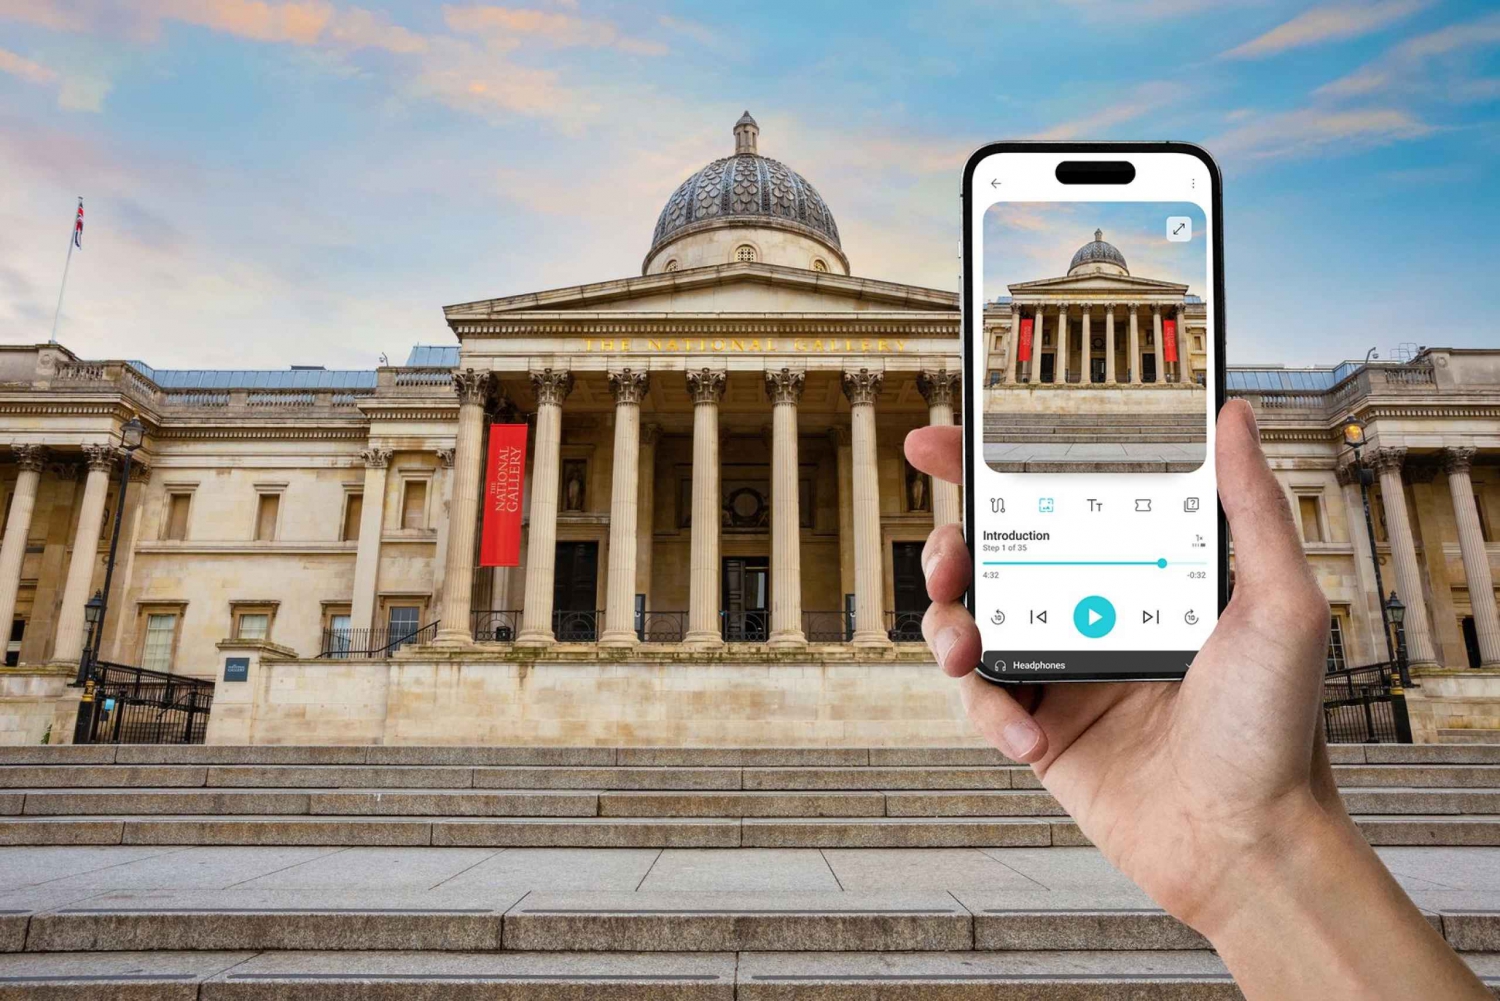 London: National Gallery Self-Guided Audio Tour